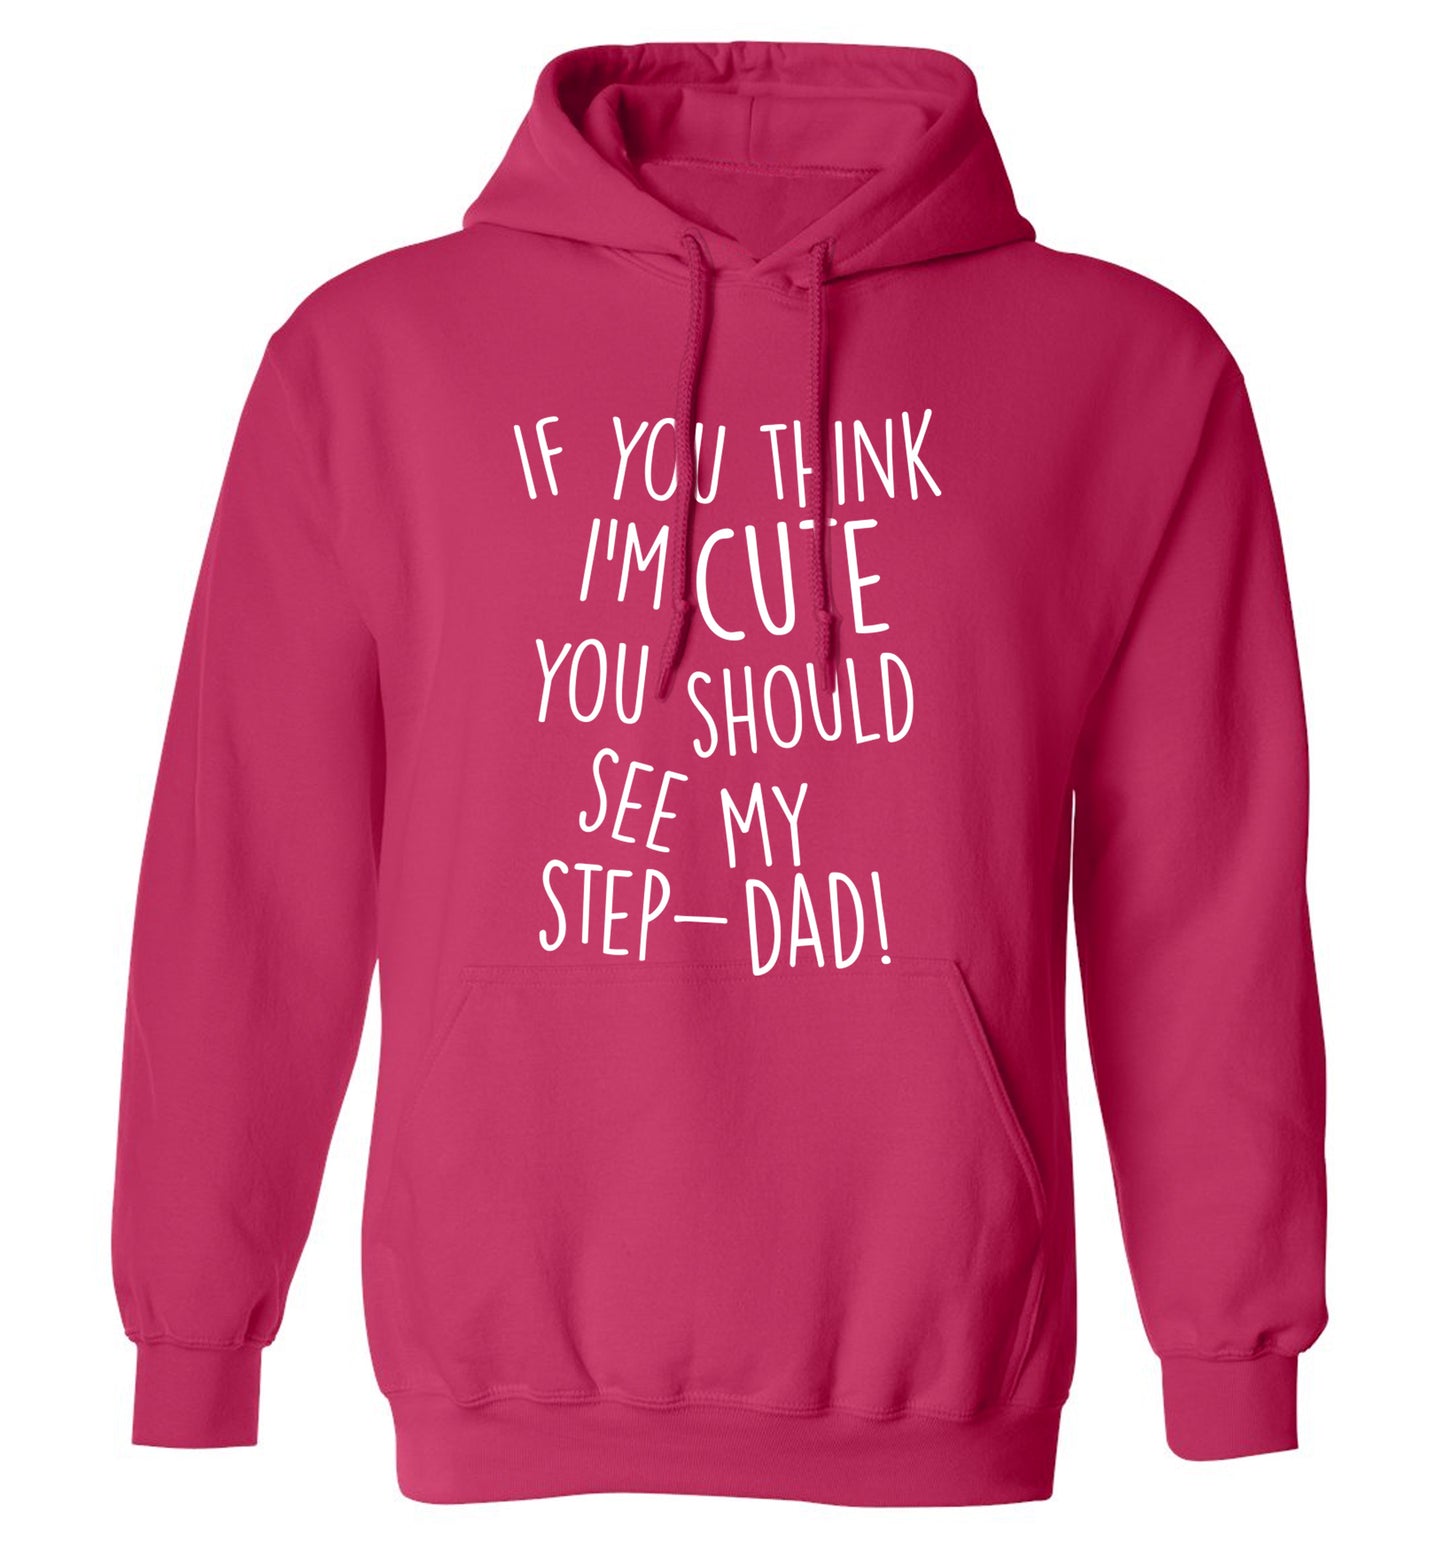 If you think I'm cute you should see my step-dad adults unisex pink hoodie 2XL